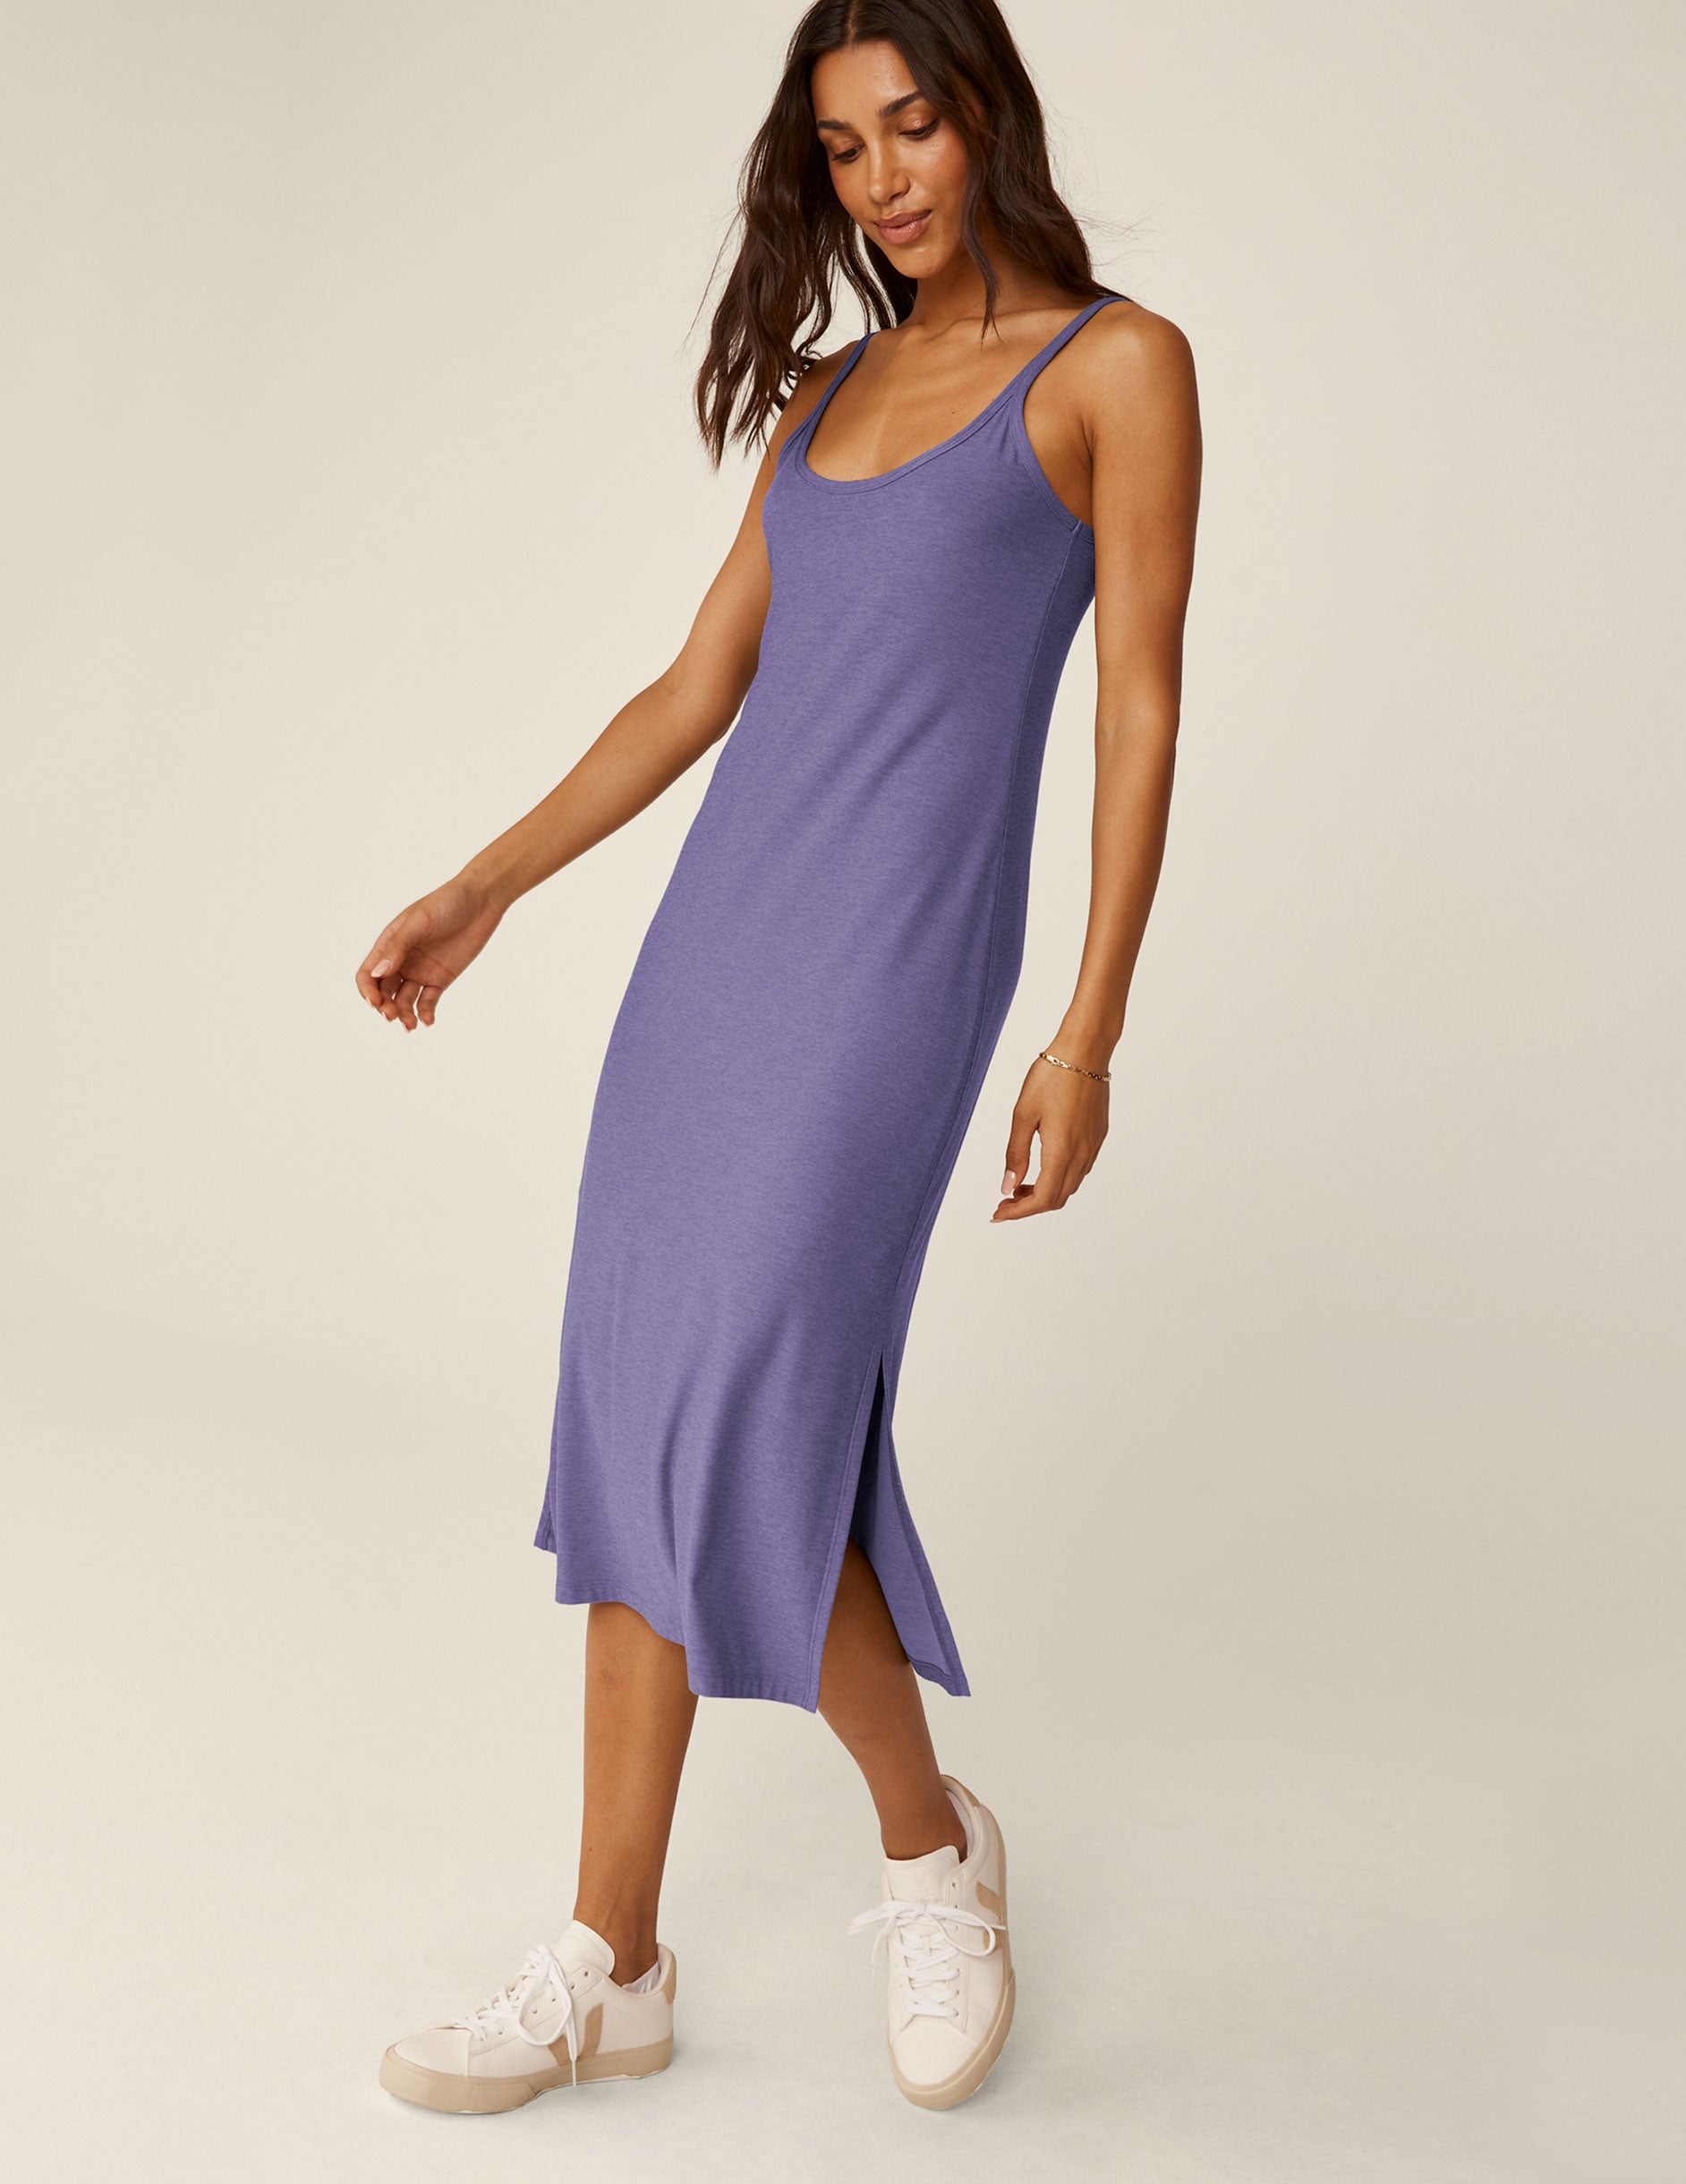 purple scoop neck midi dress with front side slit on each side. 